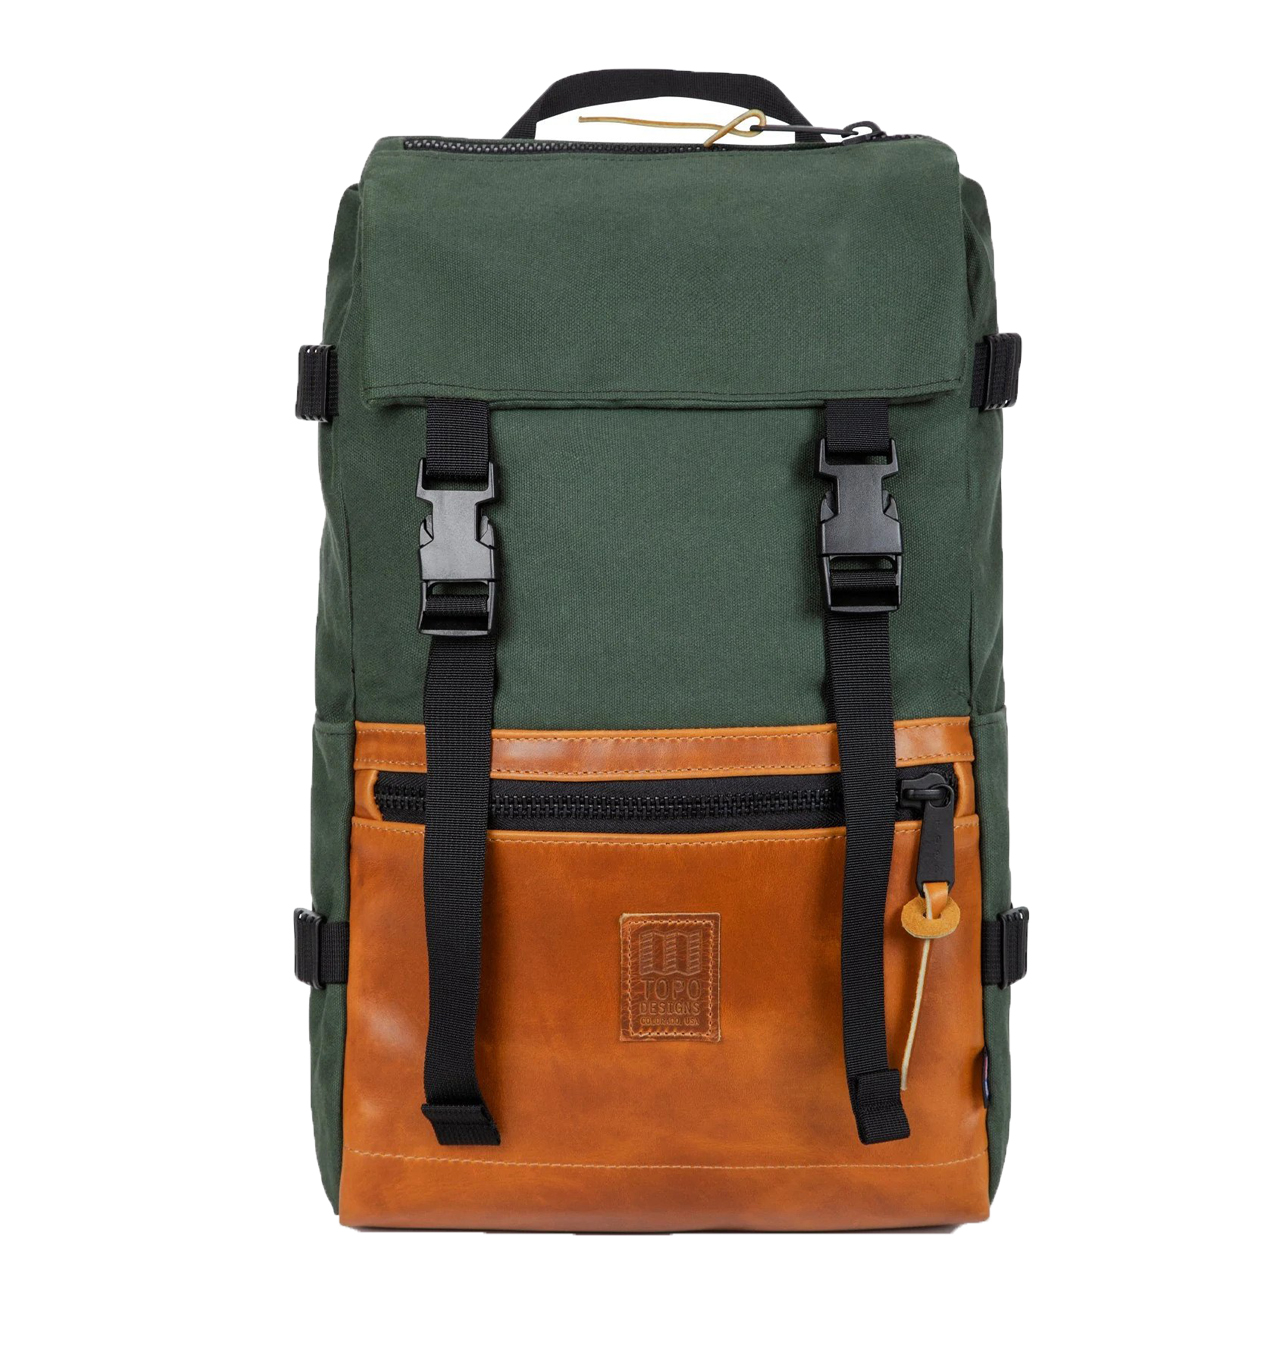 TOPO Designs - Rover Pack Heritage Canvas - Olive Canvas/Brown Leather